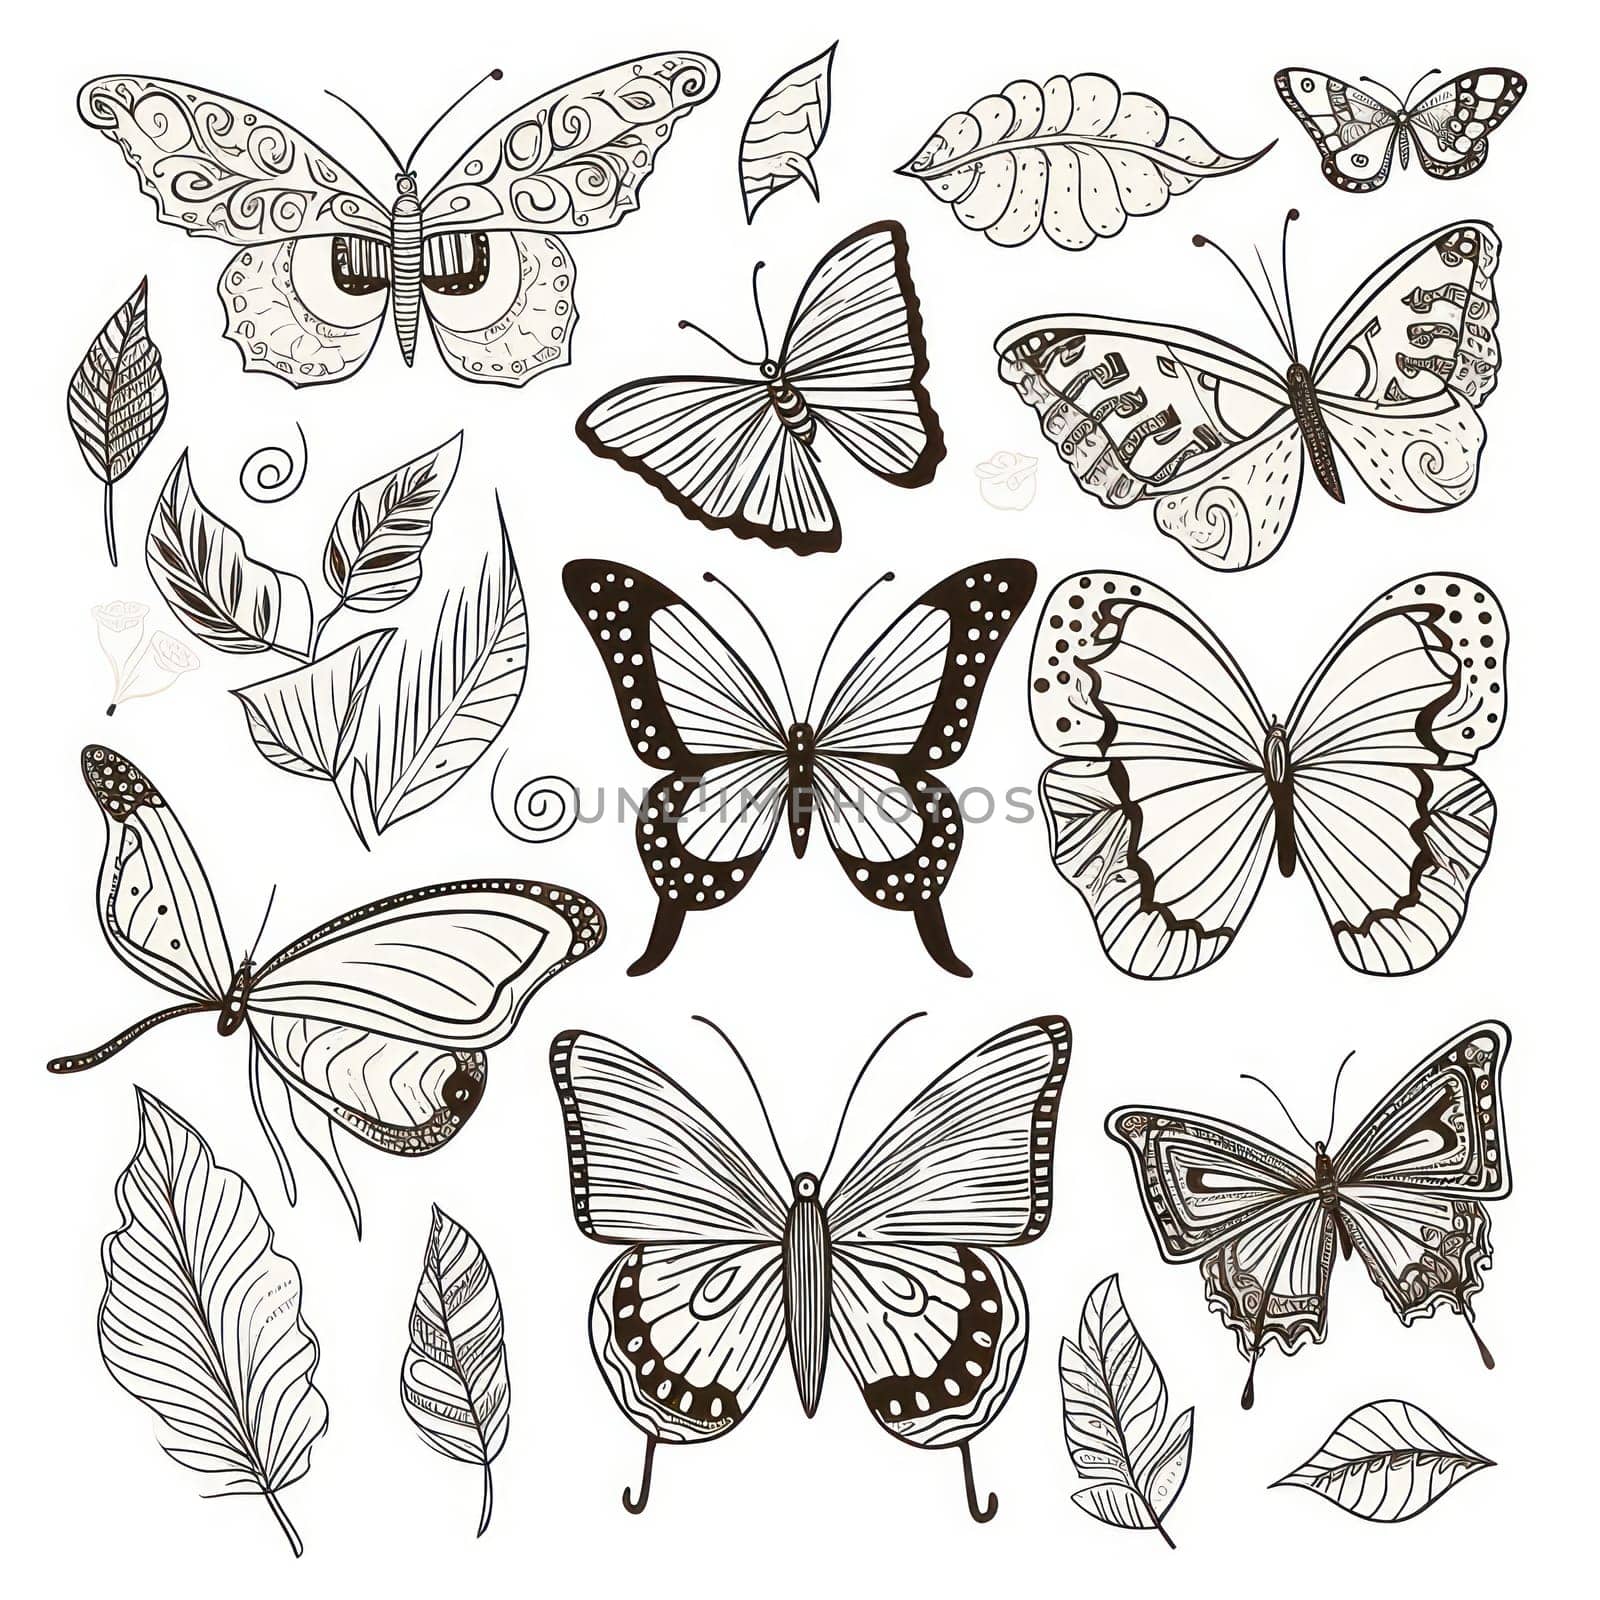 Flight of Beauty: Black and White Butterfly Collection Set on Colorful Retro Background by Vichizh